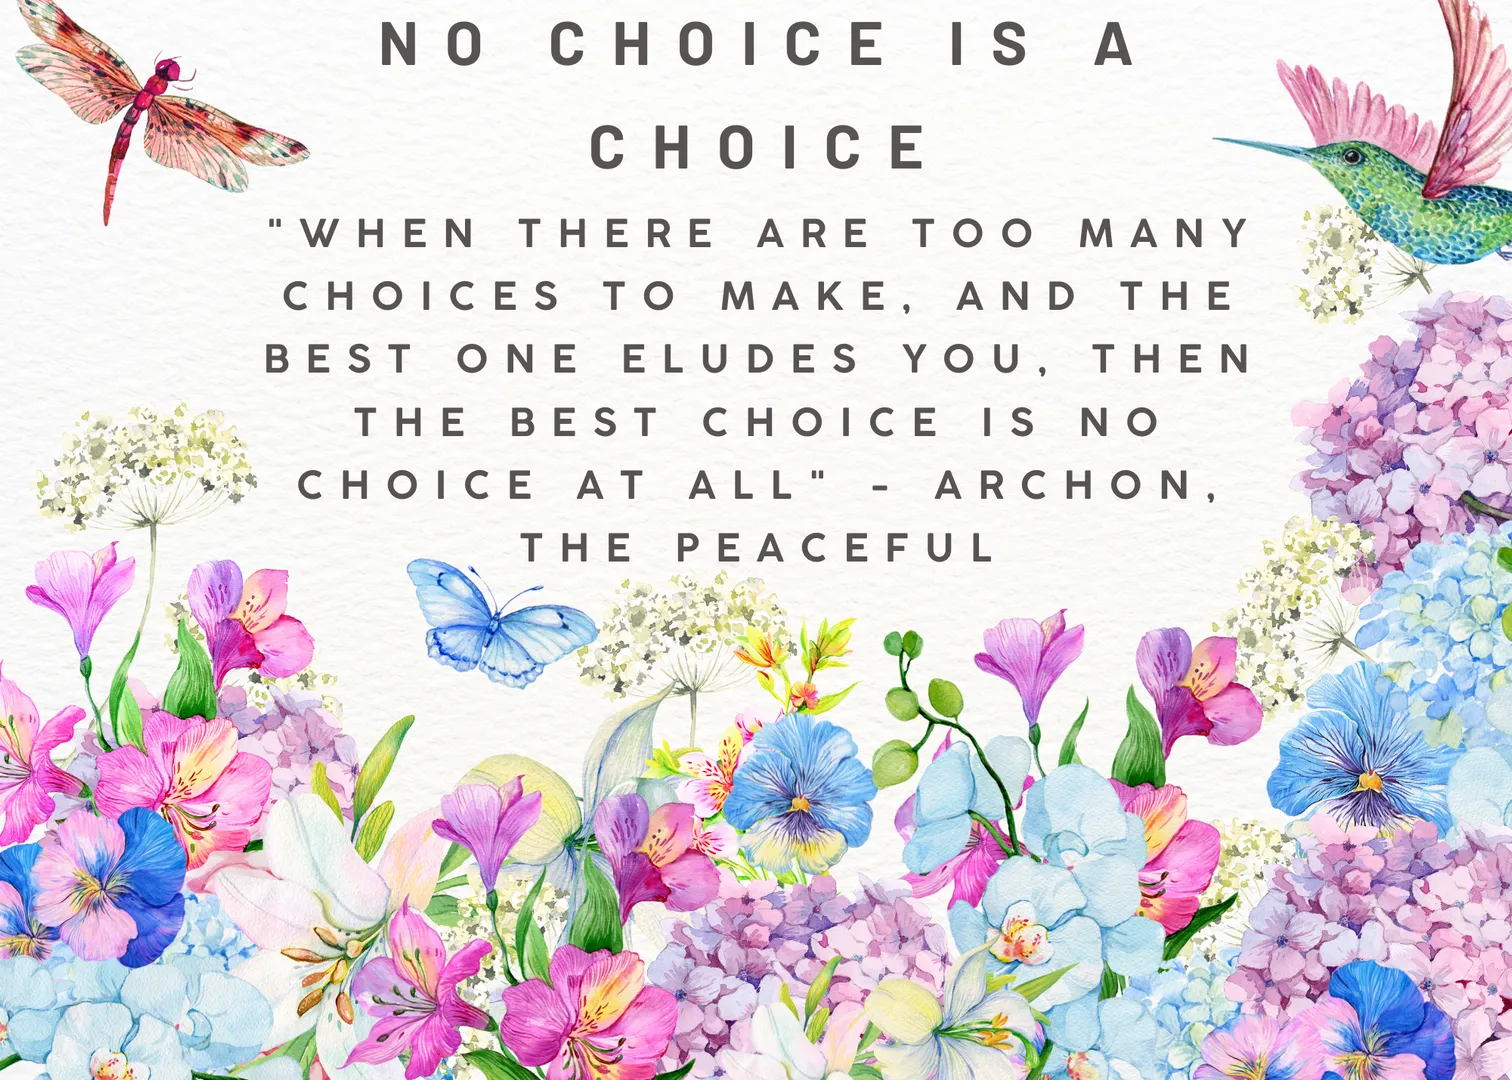 Godwrath Lore Quote: No Choice Is A Choice

Get today's quote on OpenSea for free! Make It yours!

https://opensea.io/assets/ethereum/0x495f947276749ce646f68ac8c248420045cb7b5e/54110518708055511570961916387100735752108288770146632882064646607836905740144

#quotes #quote #NFTGame #blockchain #nft #Shorts #short #shortfeed #viral #wisdom #truth #inspire #Inspirational #motivation #inspirationalquotes 